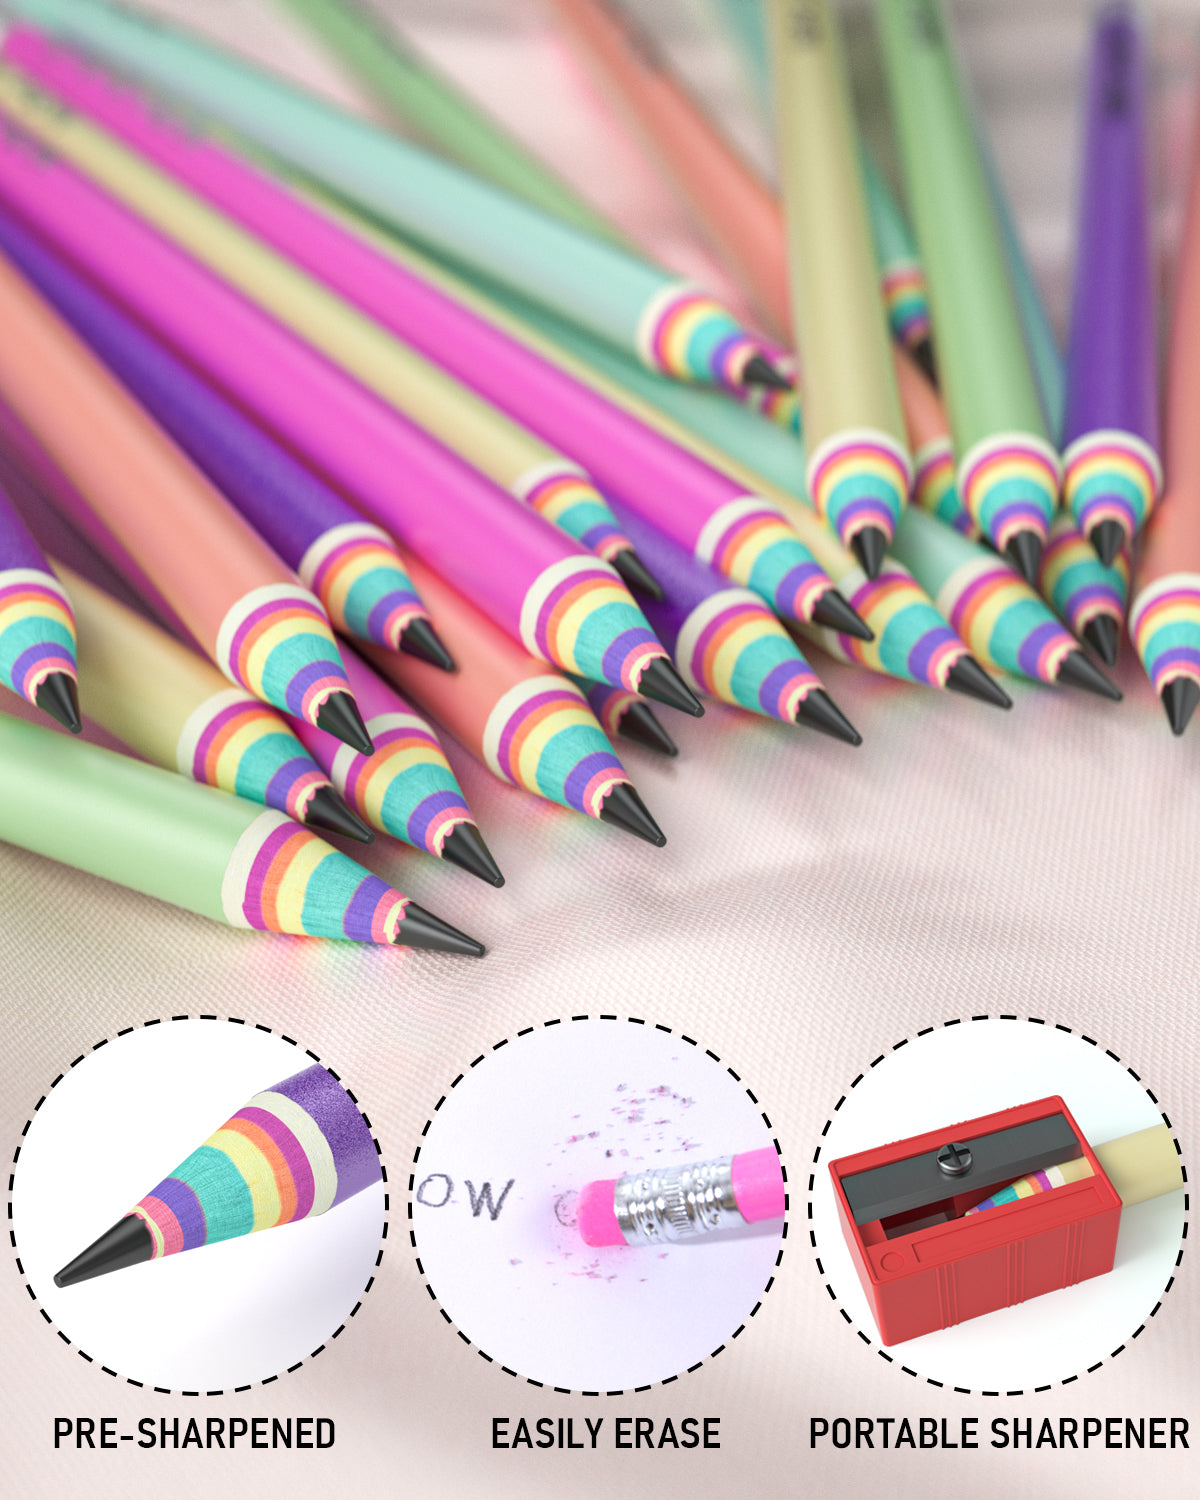 High quality 24pcs oil colored pencils drawing set and bulk